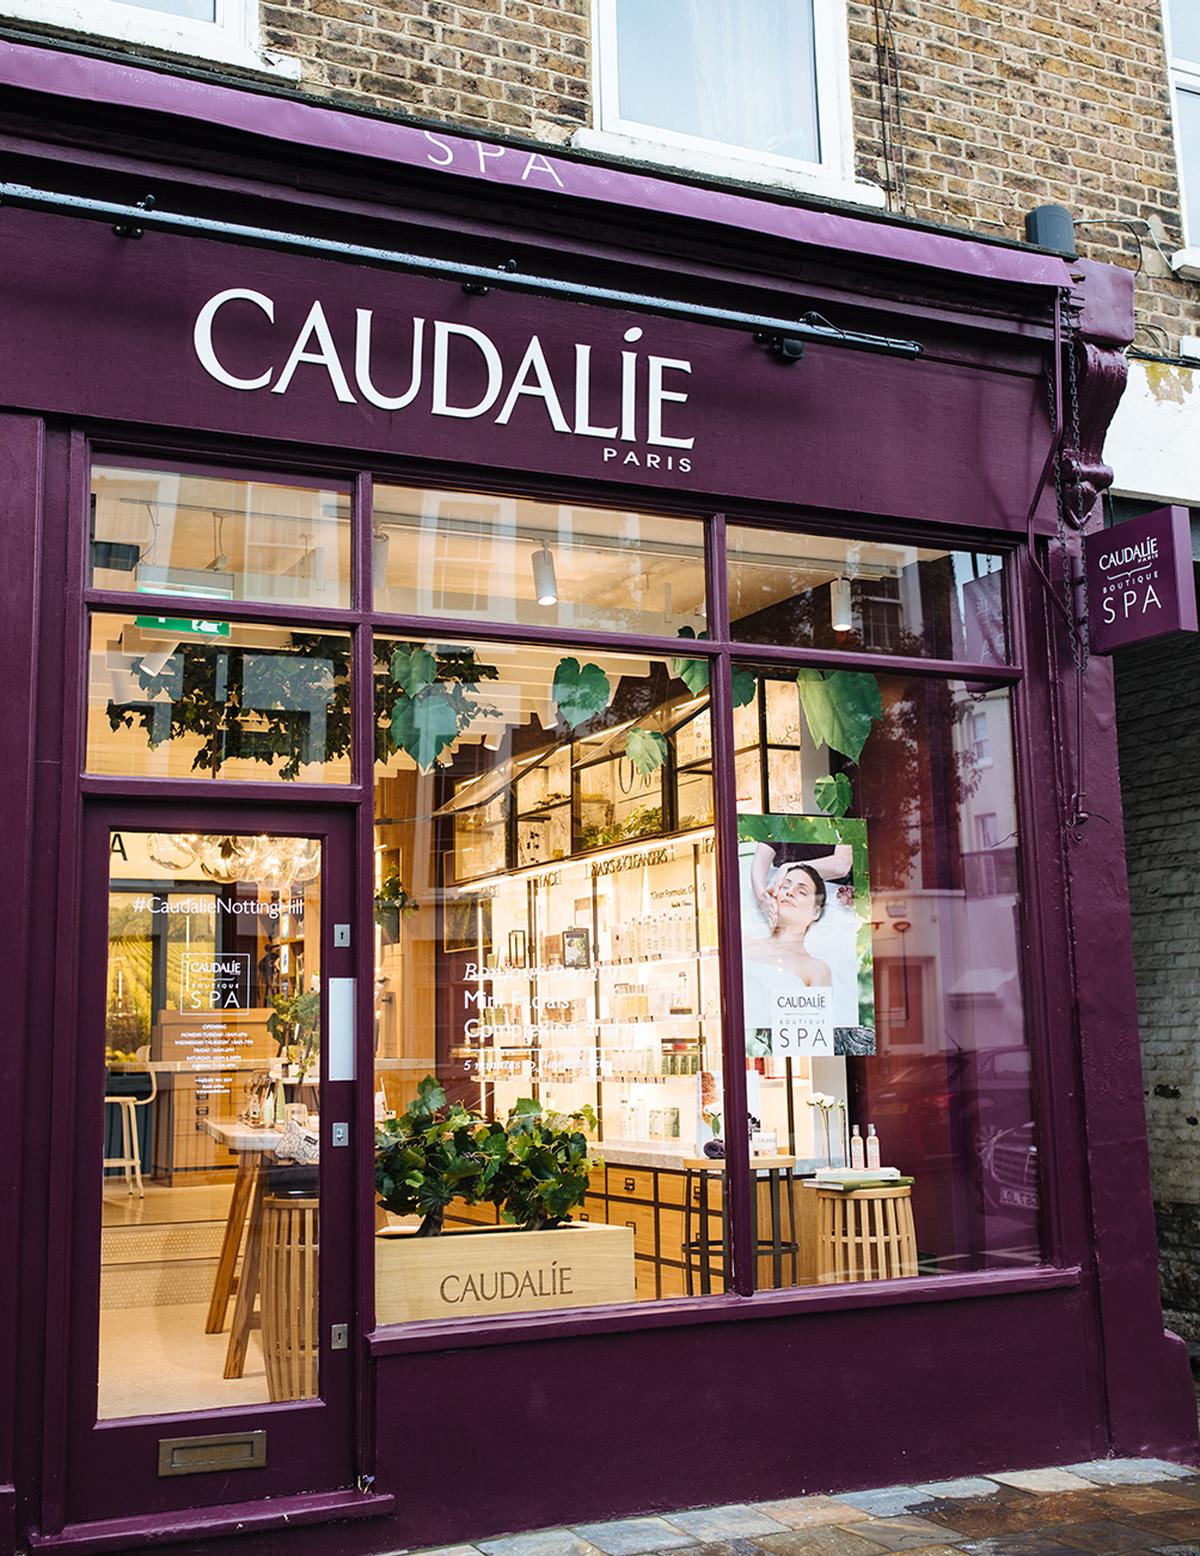 Caudalie has 39 boutique spas worldwide and has already opened three London locations: Covent Garden, Northcote Road and Islington.